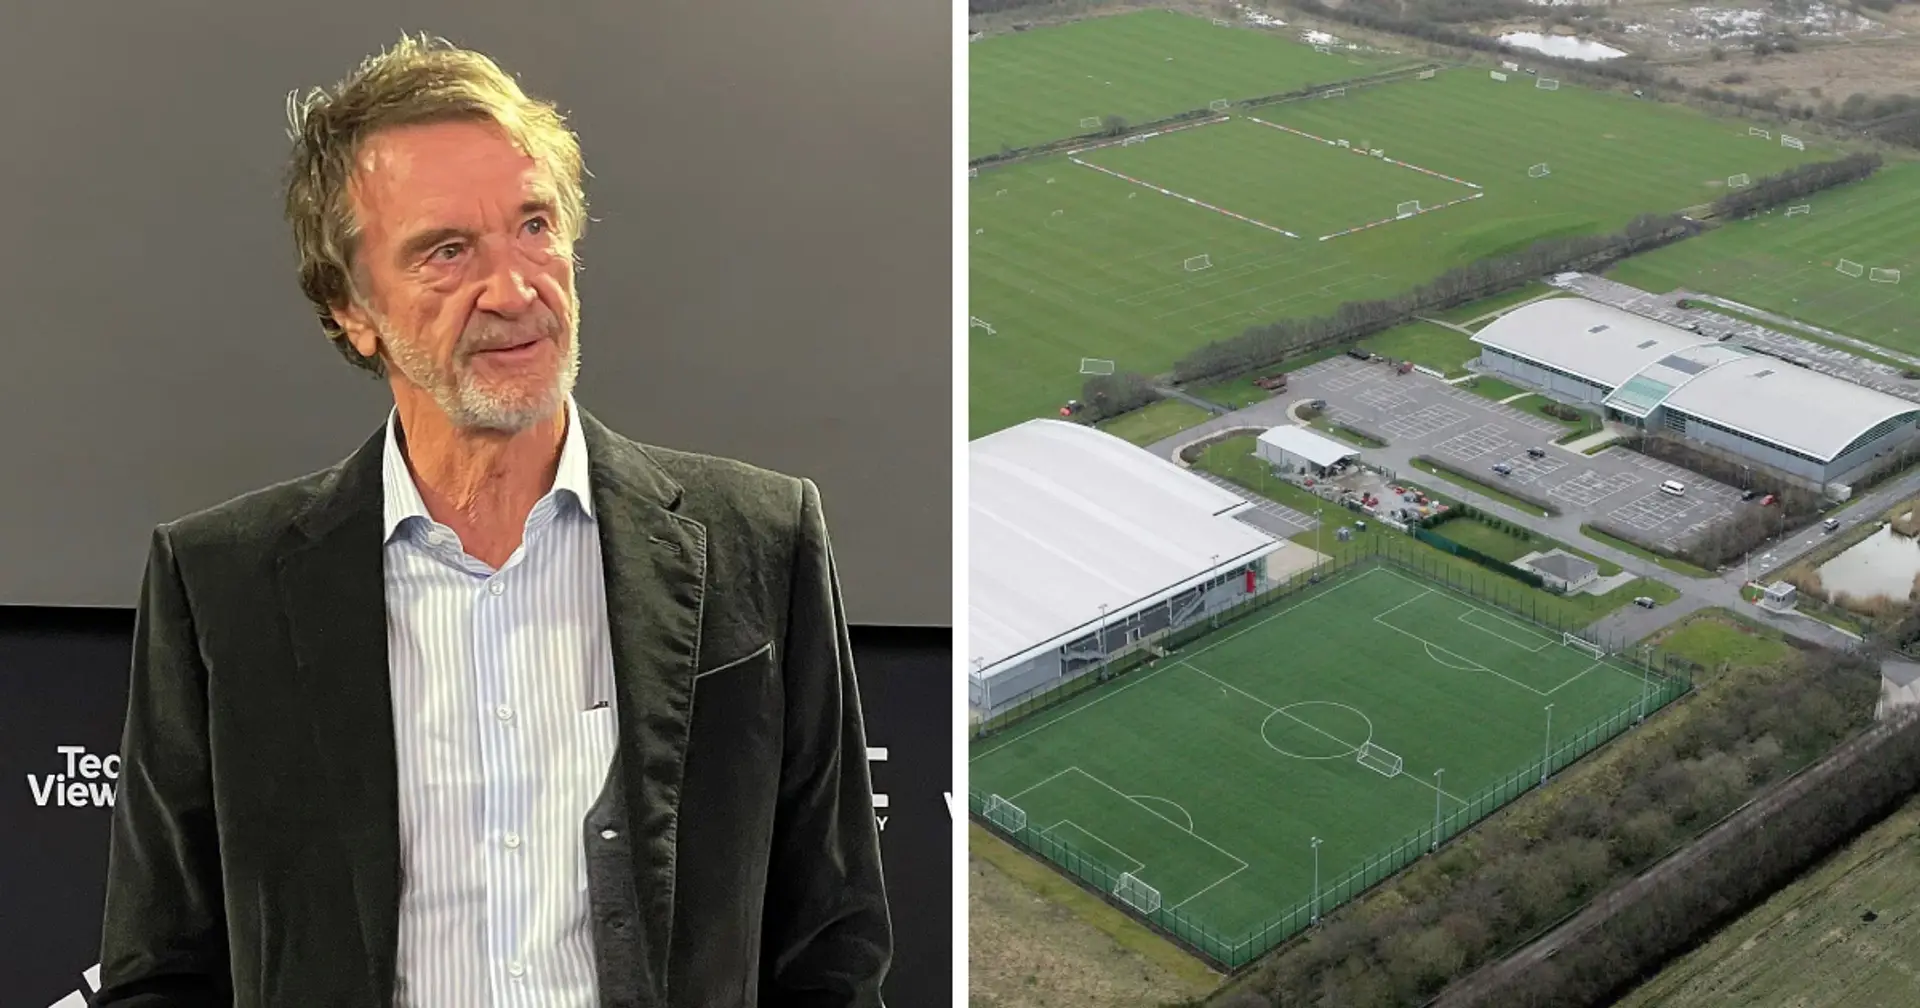 Man United prepare to overhaul Carrington training ground to lower the risks of players being injured 